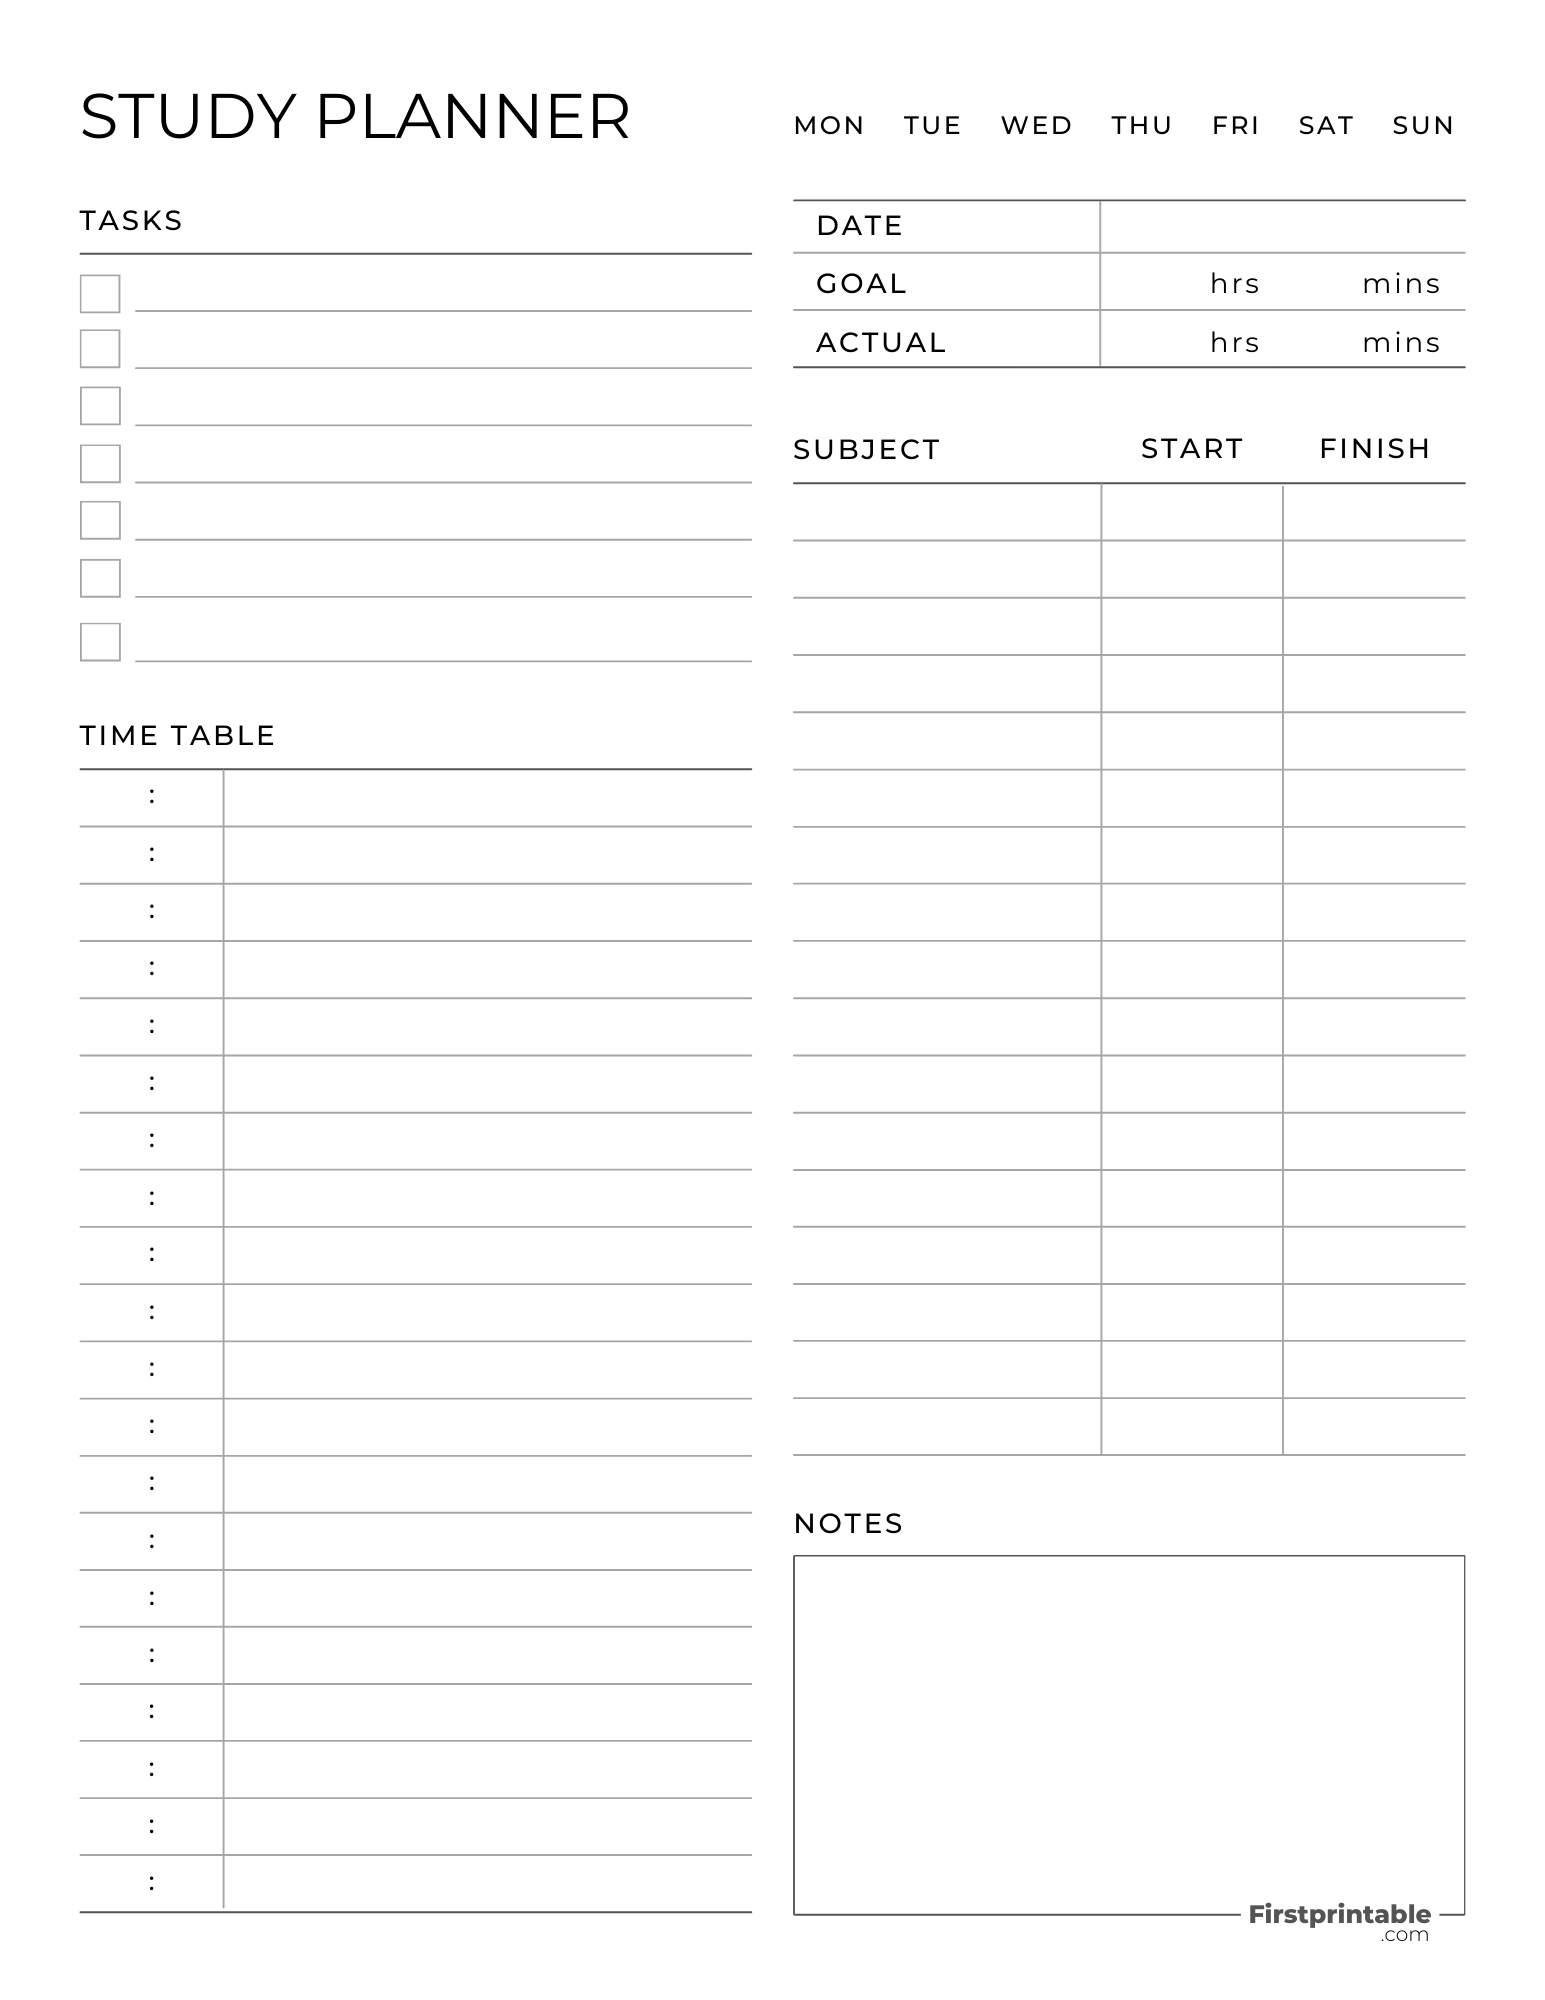 Free Printable Daily Study Planner - Fillable PDF Format